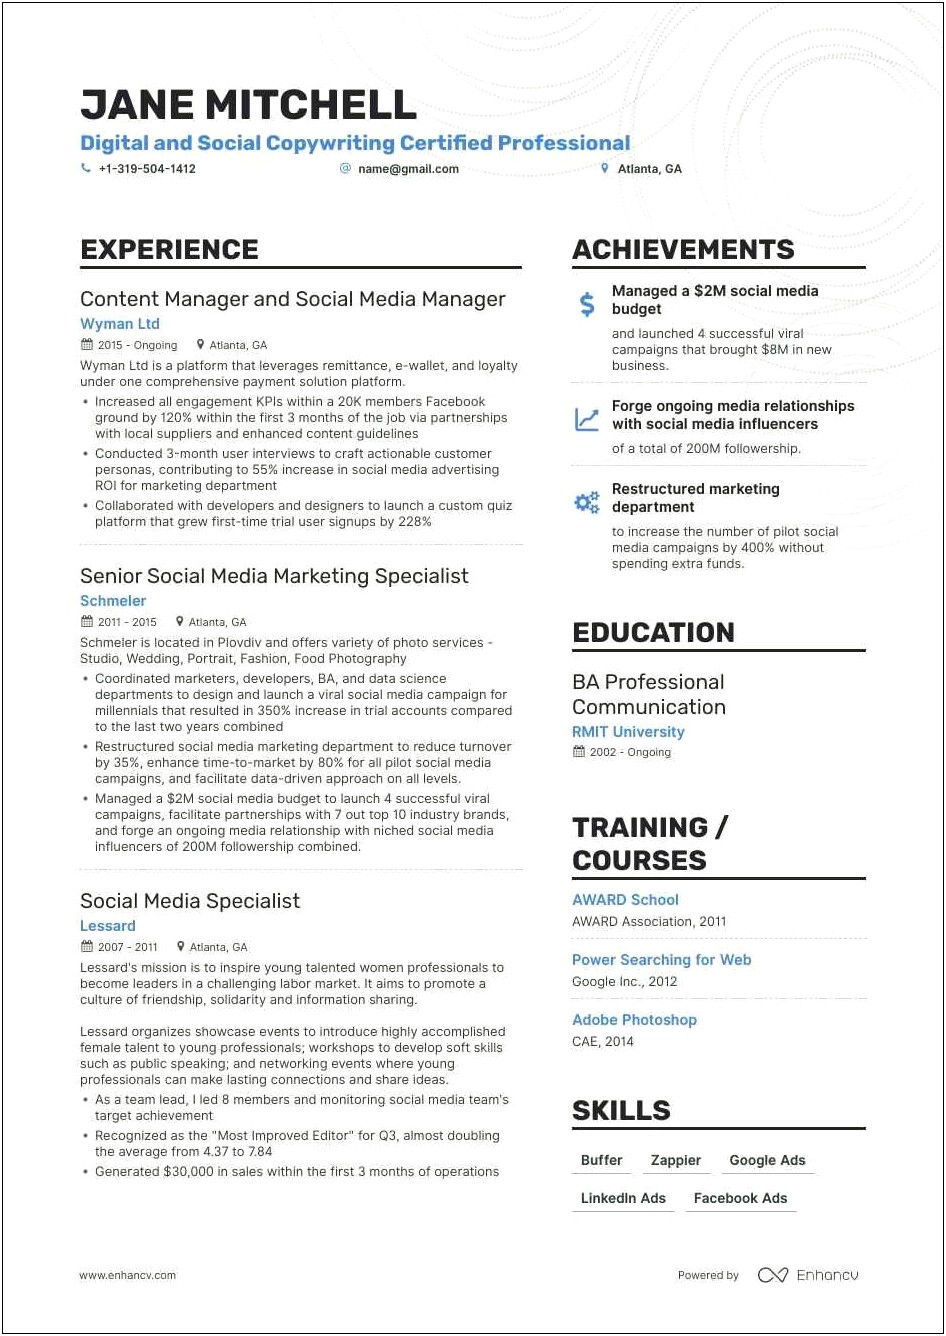 Director Of Photography & Media Manager On A Resume